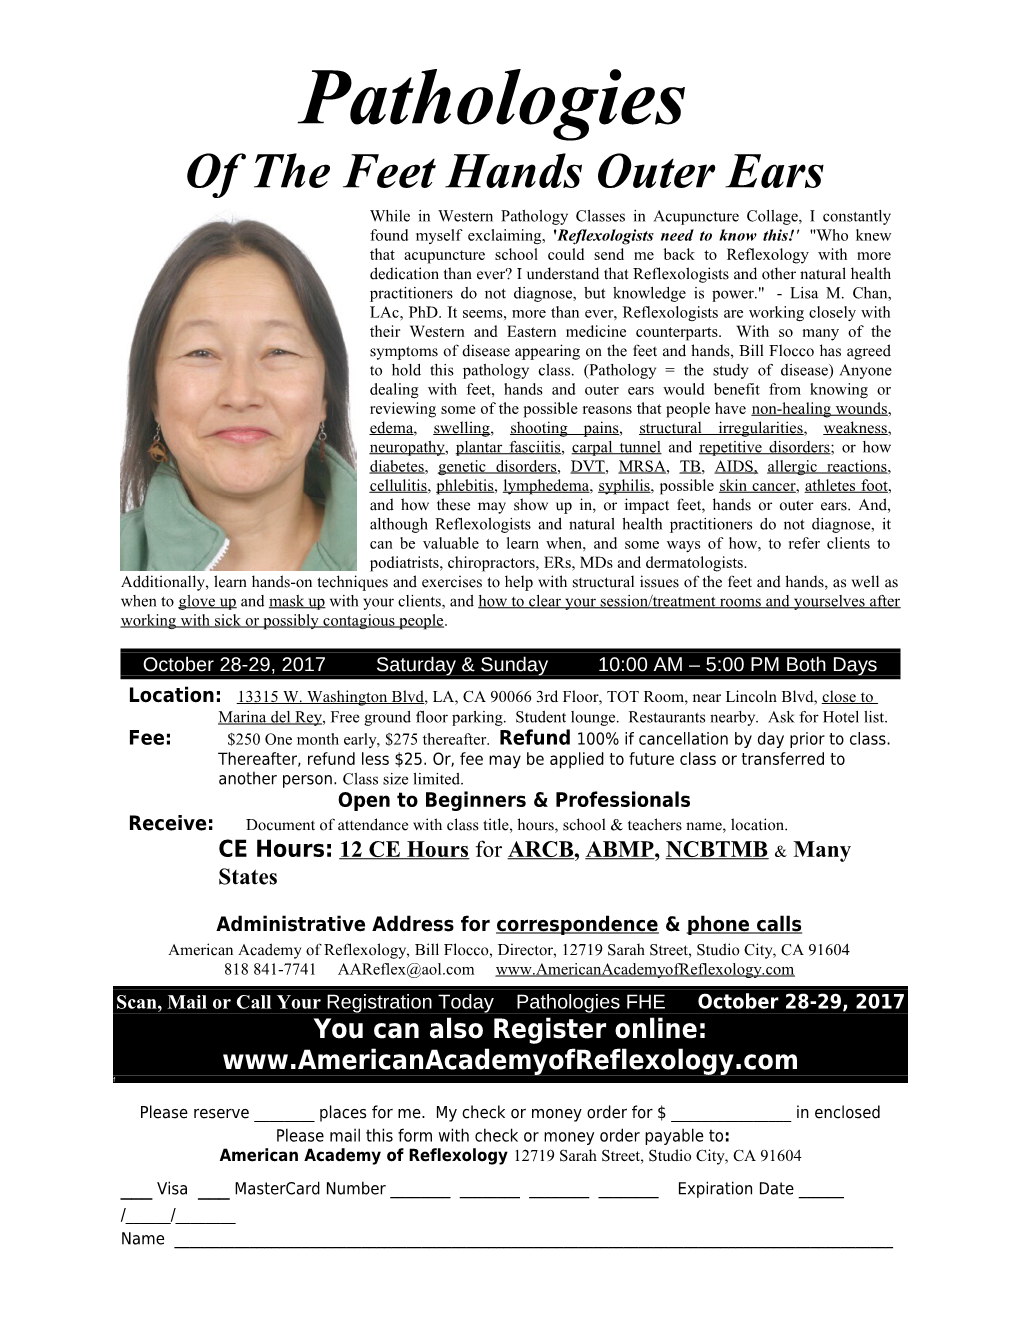 Of the Feet Hands Outer Ears